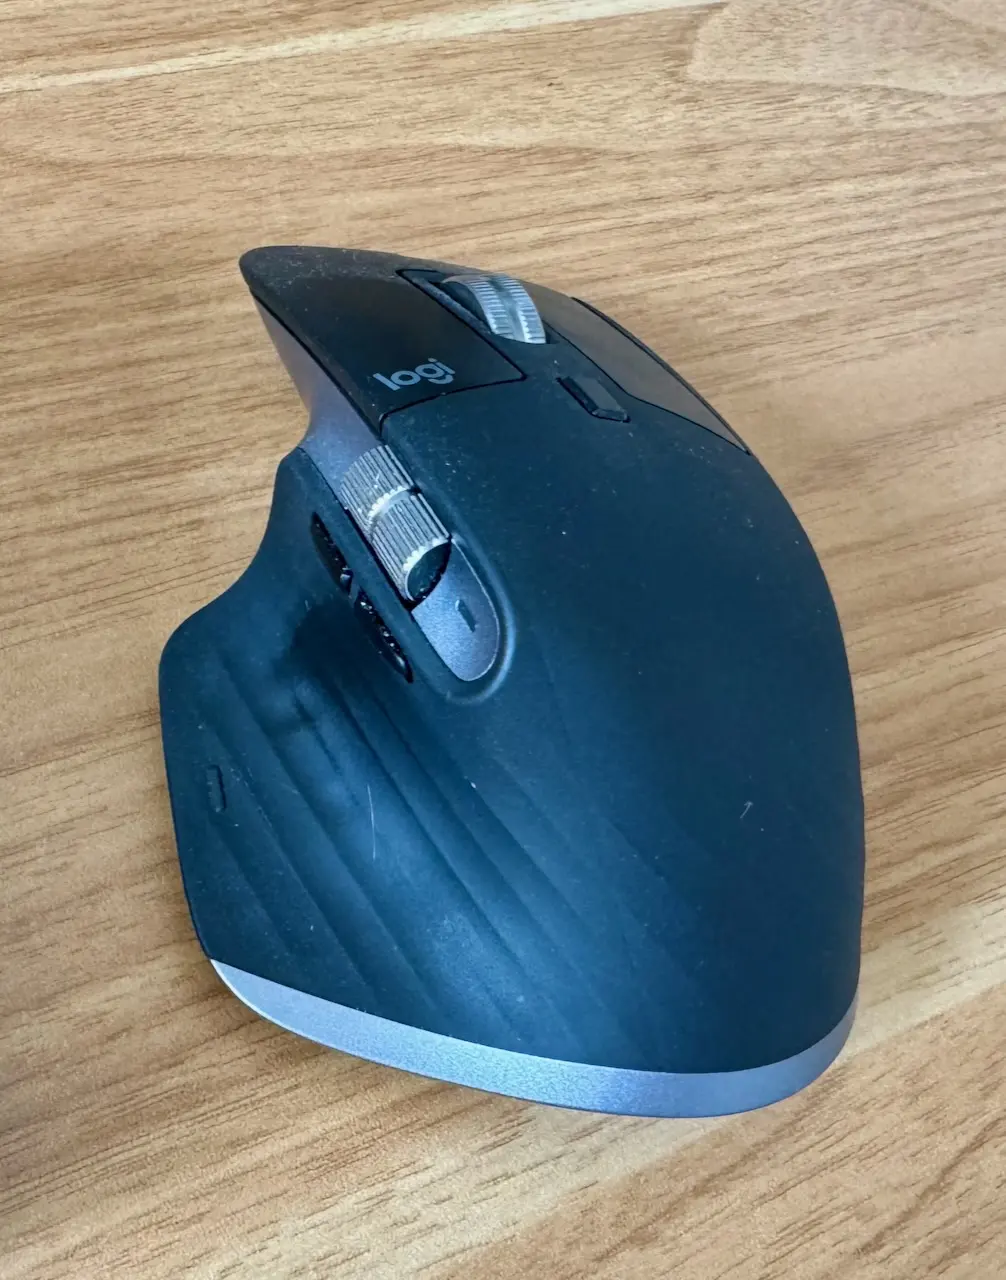 An image of the Logitech MX master 3s for Mac